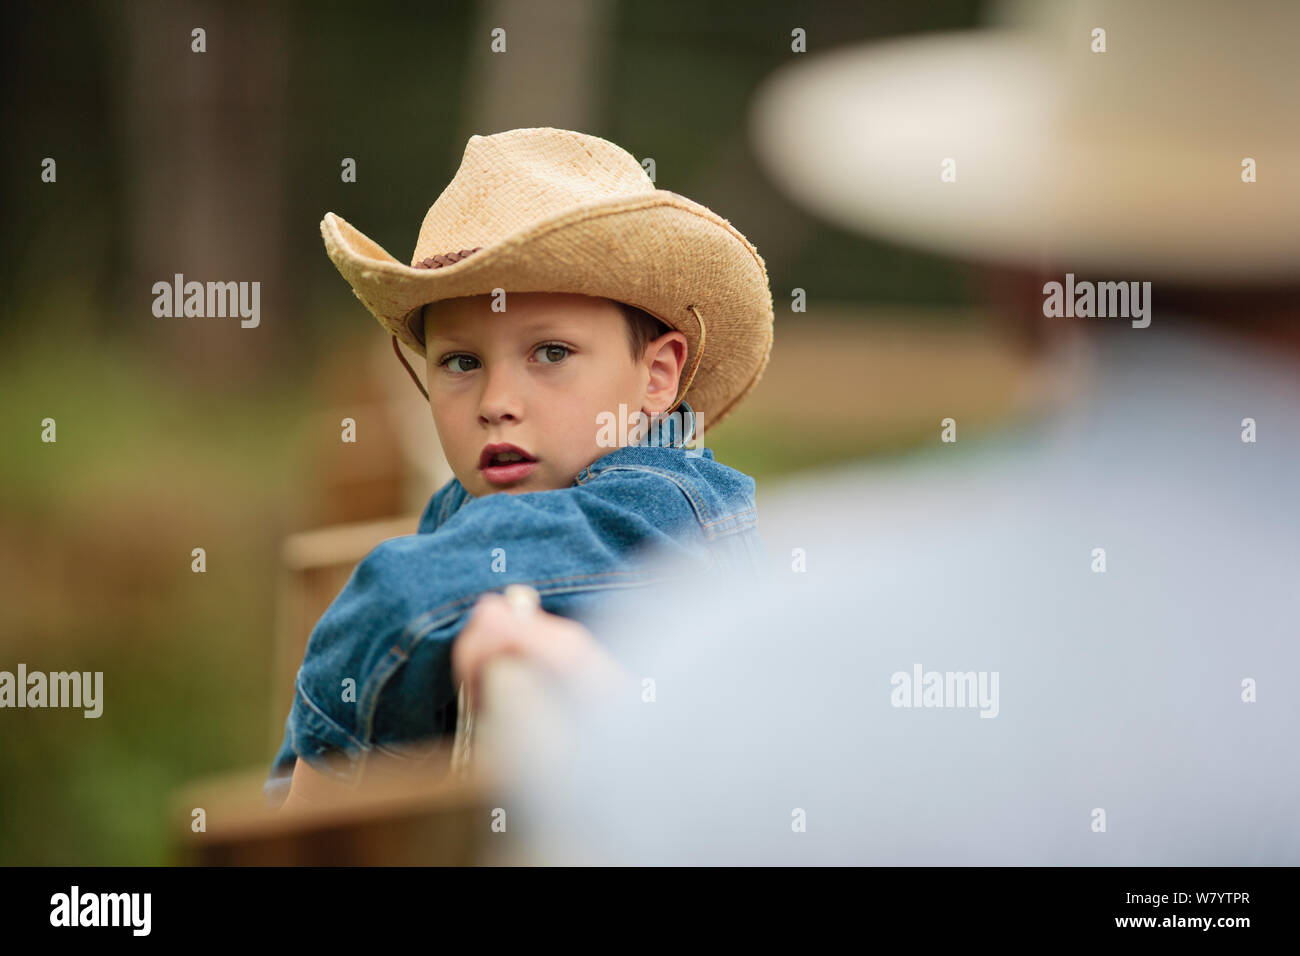 Little baby boy dressed like a cowboy sitting in front of saddle Stock  Photo - Alamy